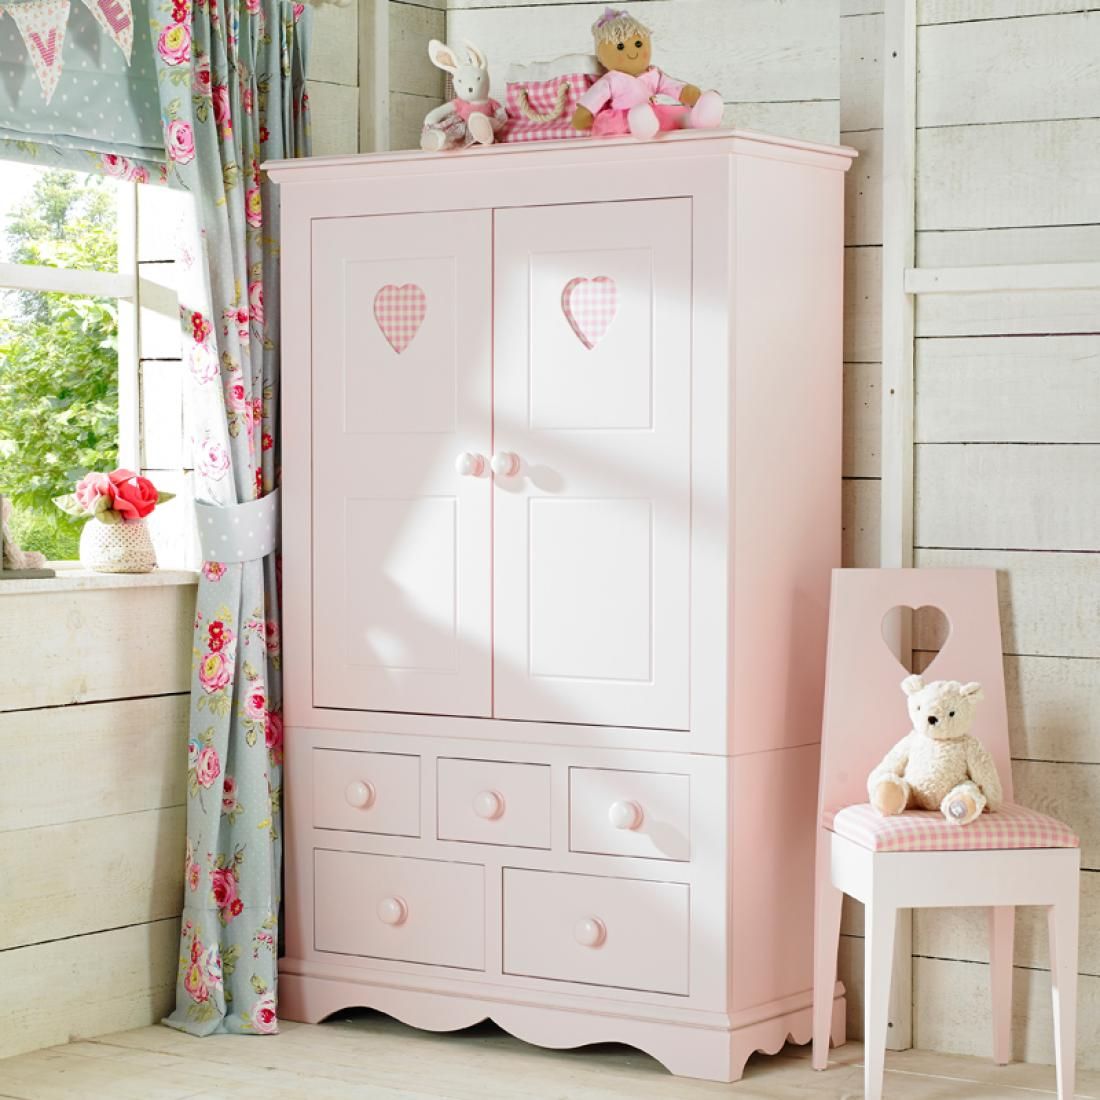 Looby Lou Combination Wardrobe | Childrens Wardrobe | Girls Wardrobe In Childrens Pink Wardrobes (View 2 of 15)